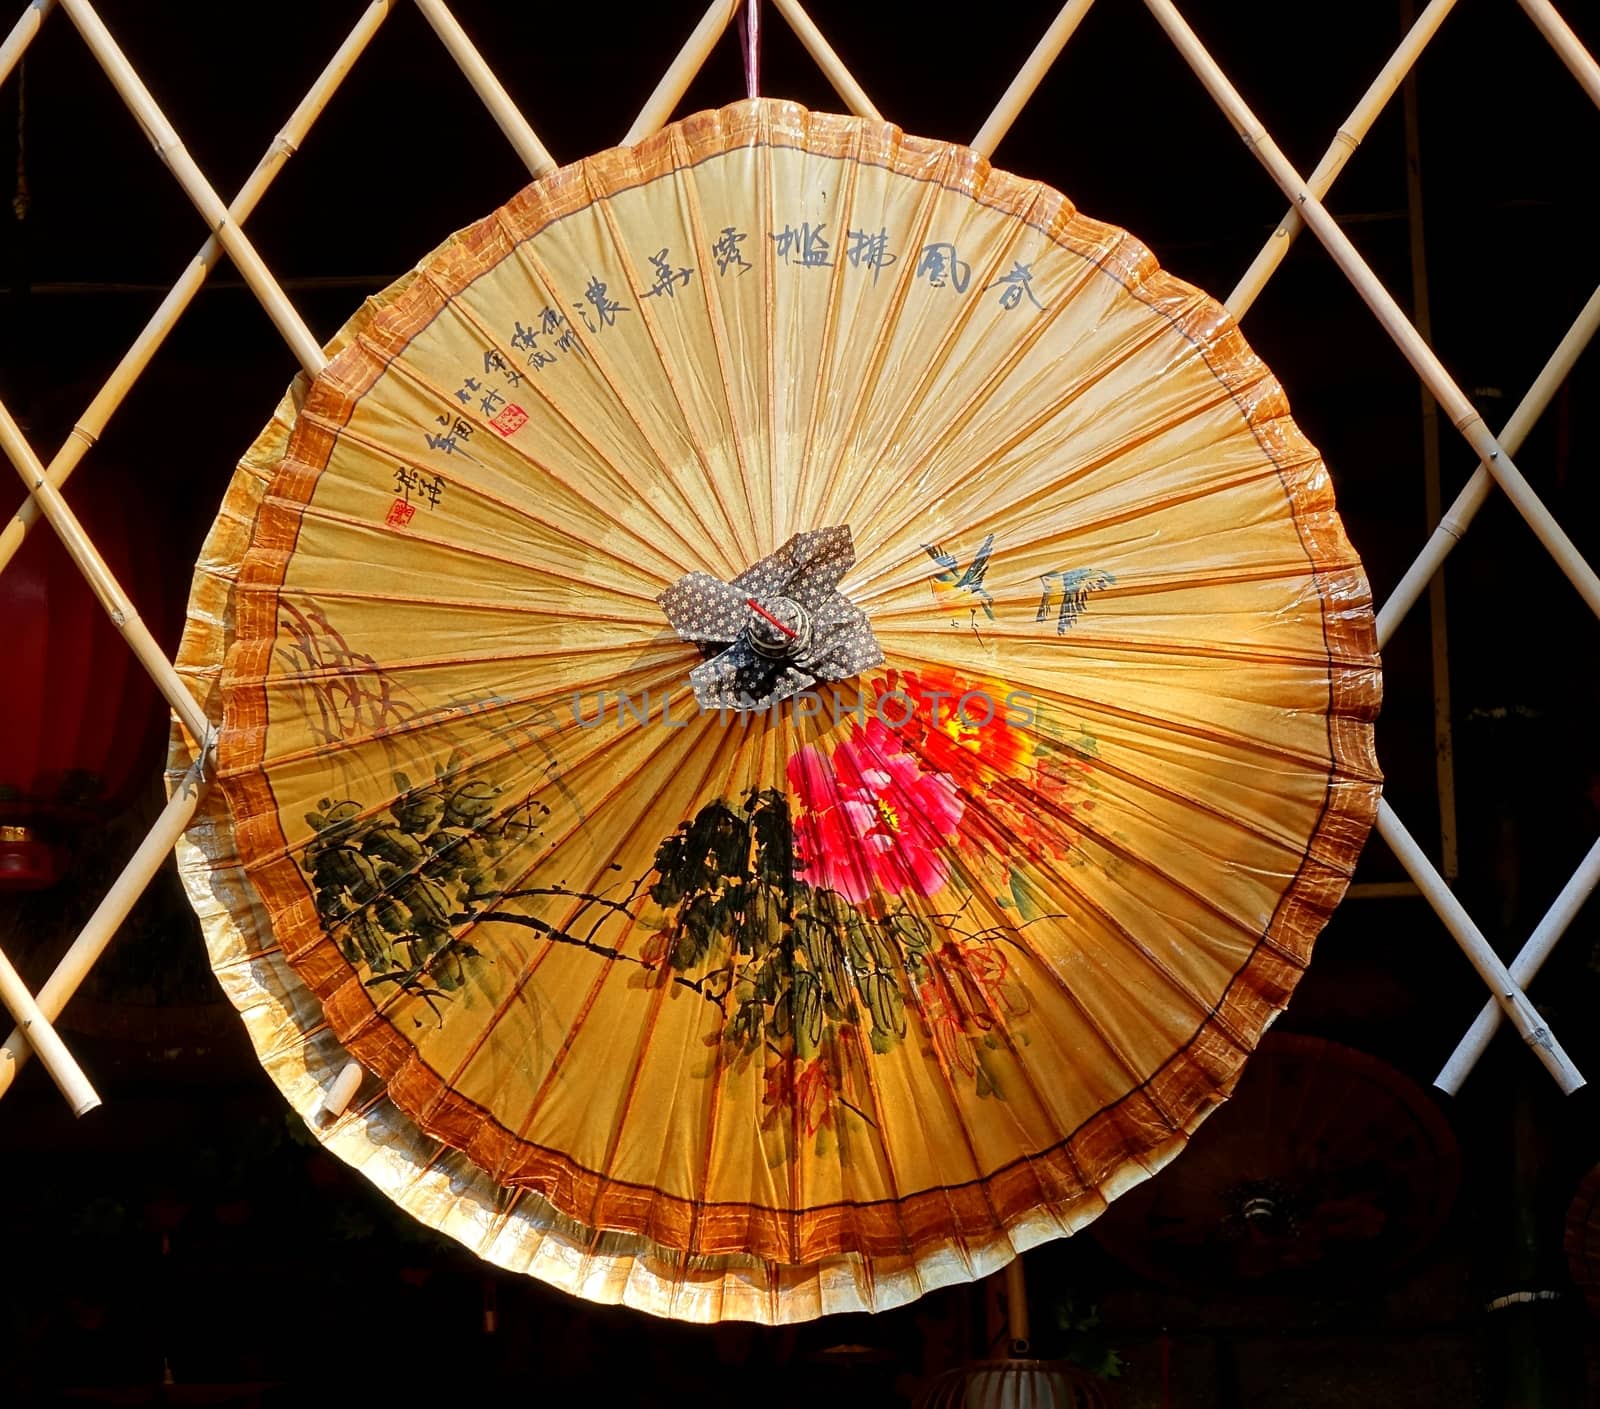 KAOHSIUNG, TAIWAN -- JULY 24, 2016: A hand-painted oil-paper umbrella, which is a traditional art and craft product by the Chinese Hakka people.